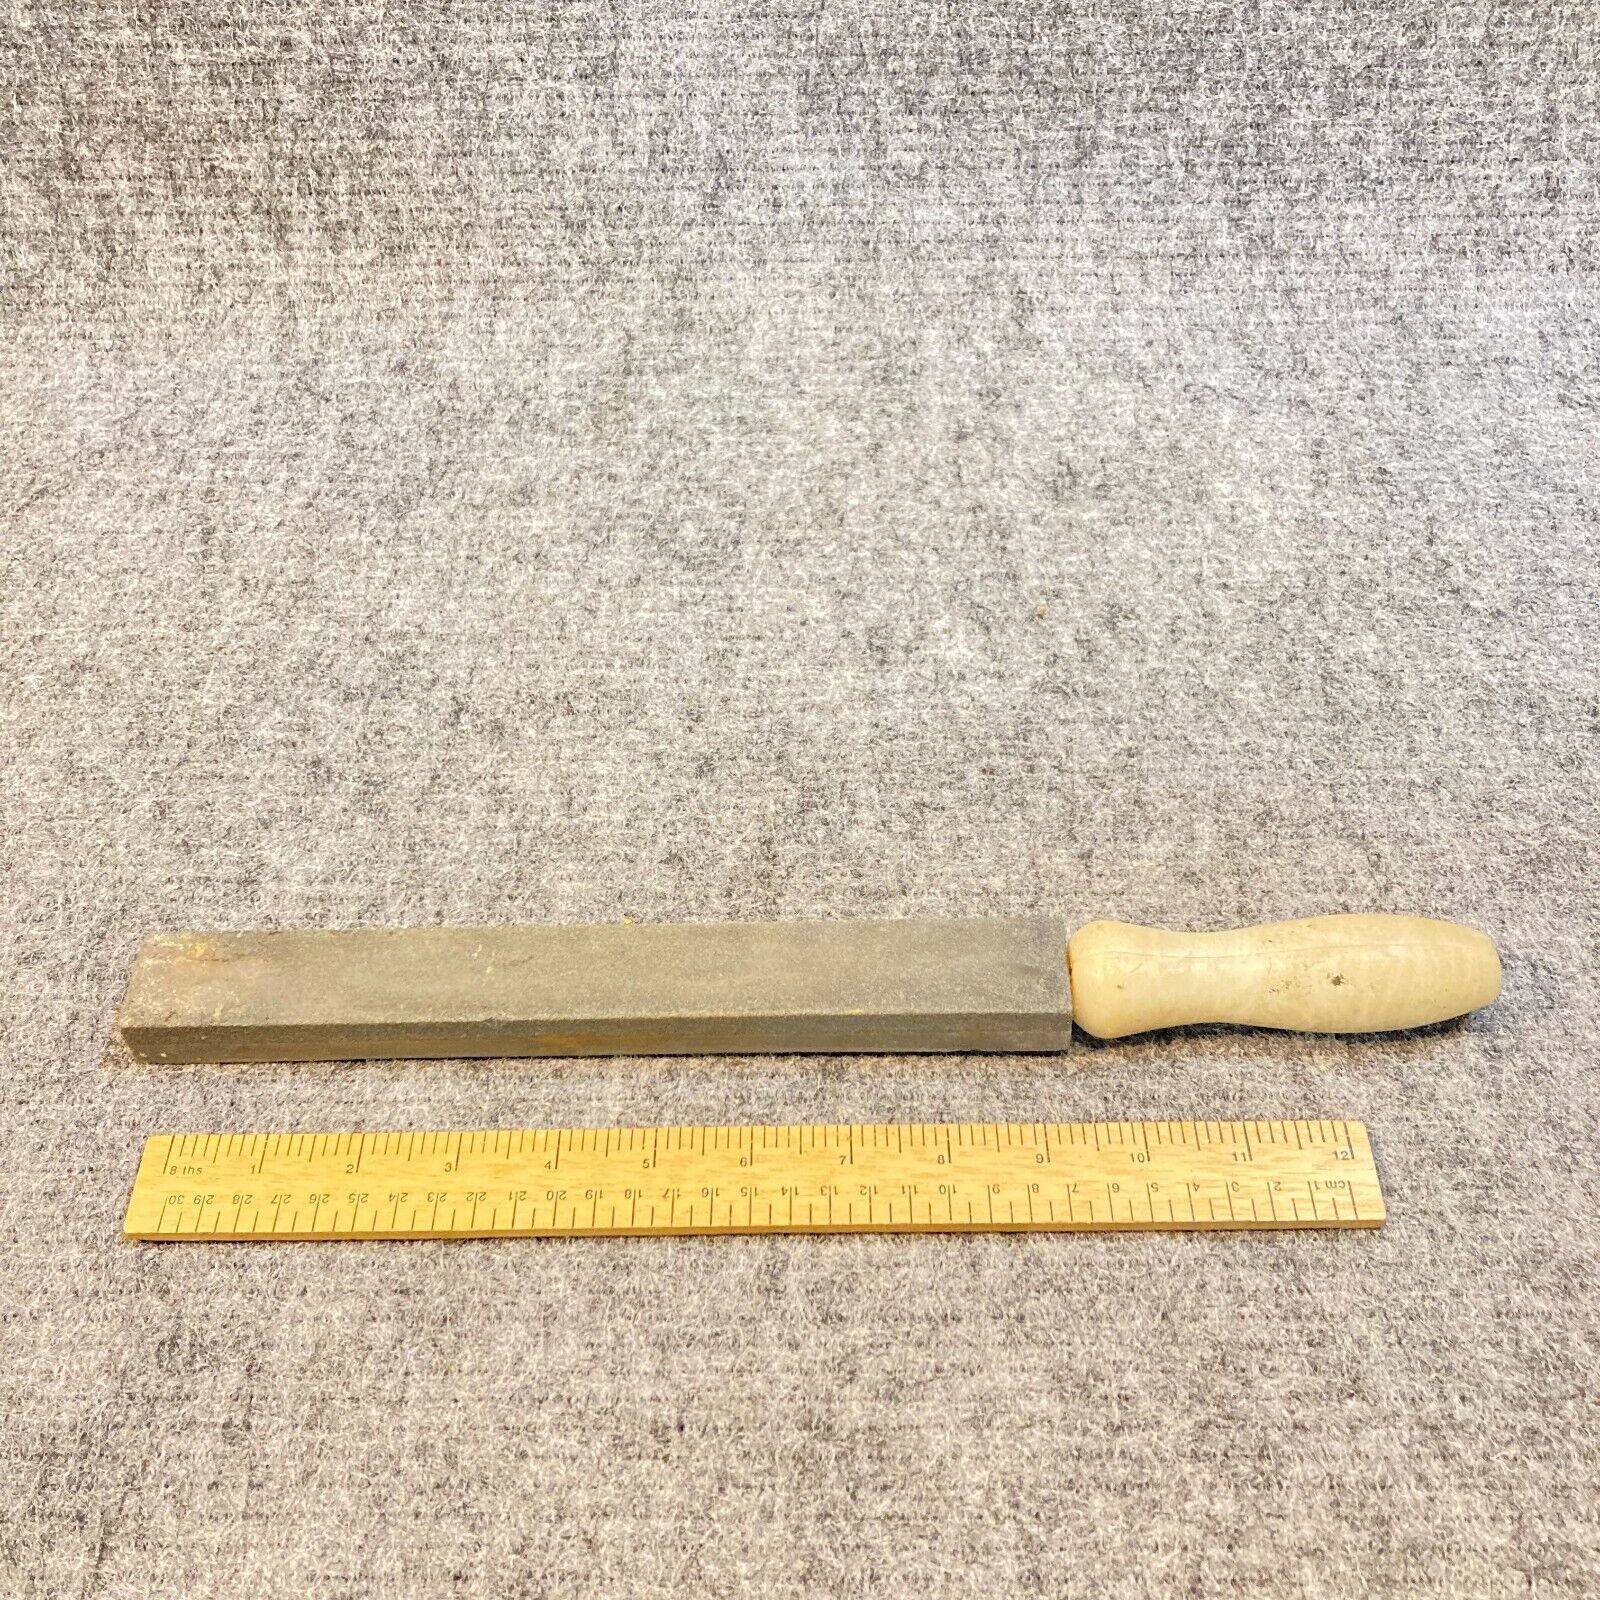 Vintage Sharpening Stone Double Grit Coarse/Fine With Handle